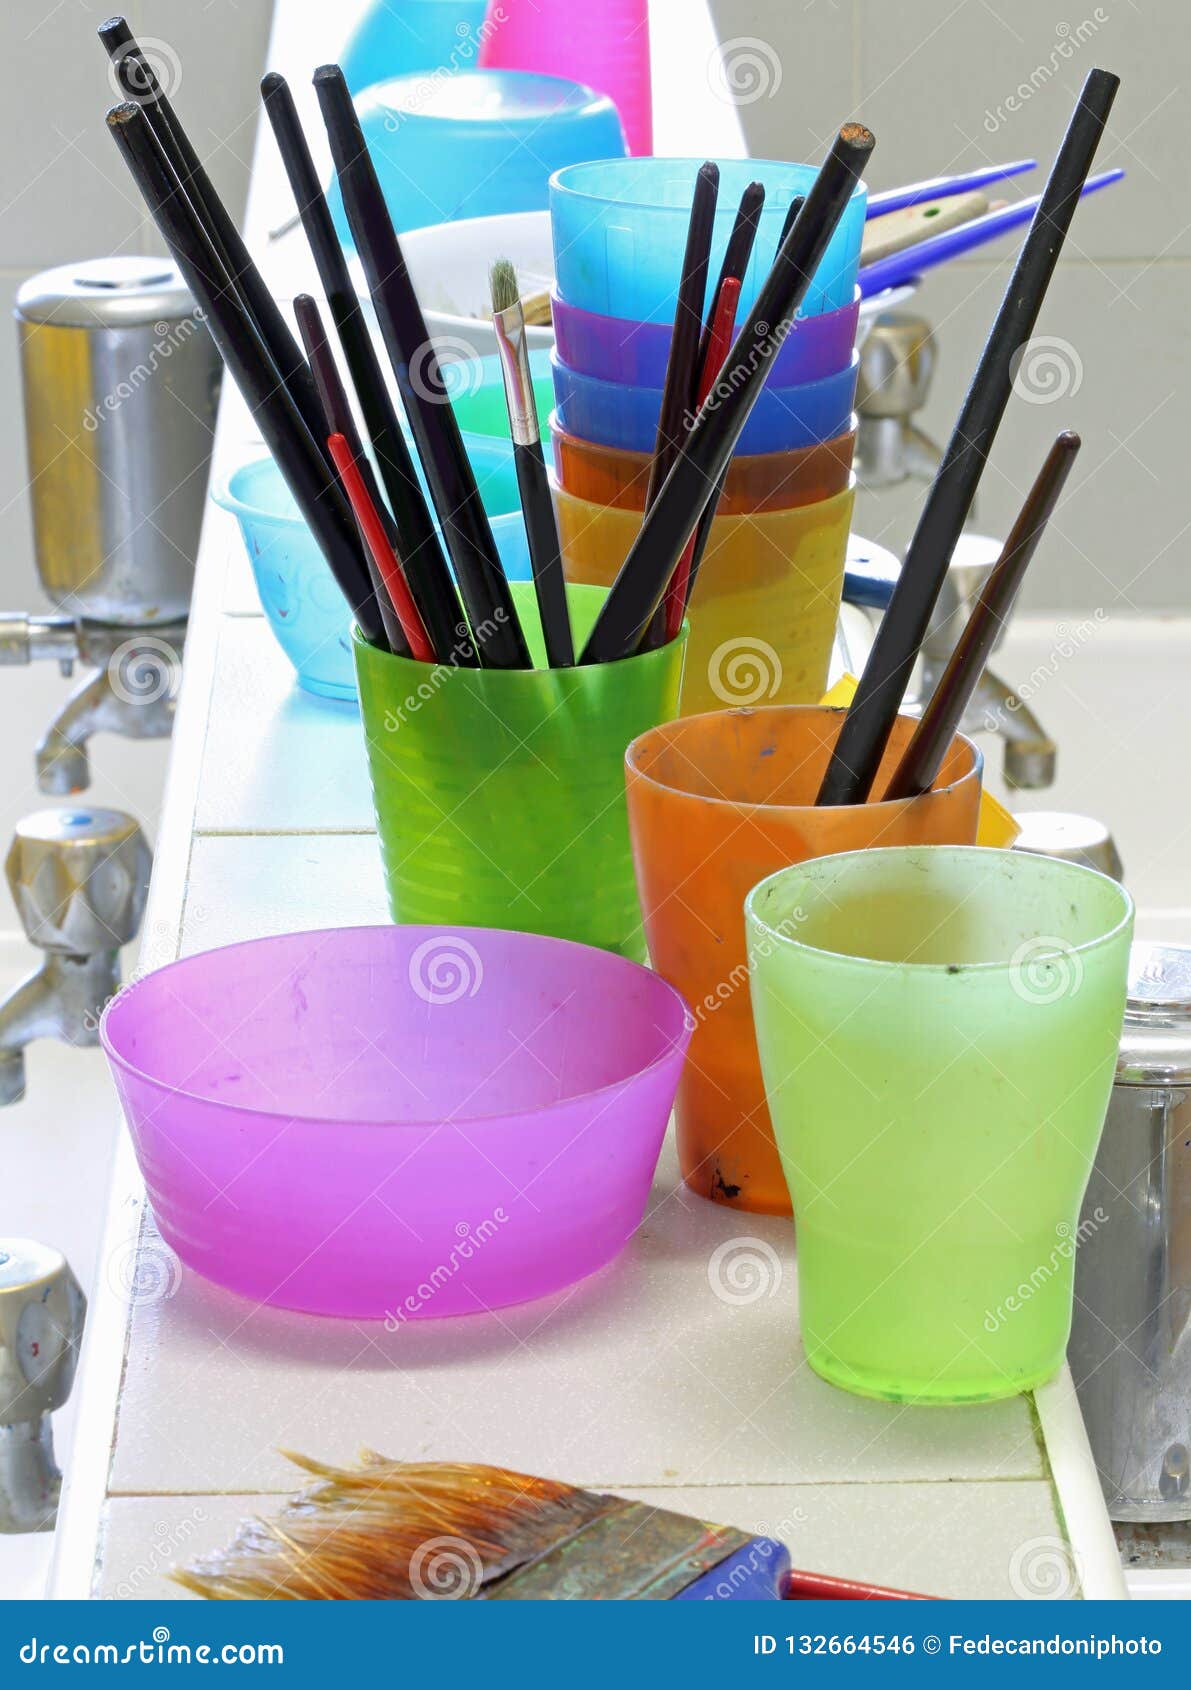 brushes to wash after the lession of teaching painting technique